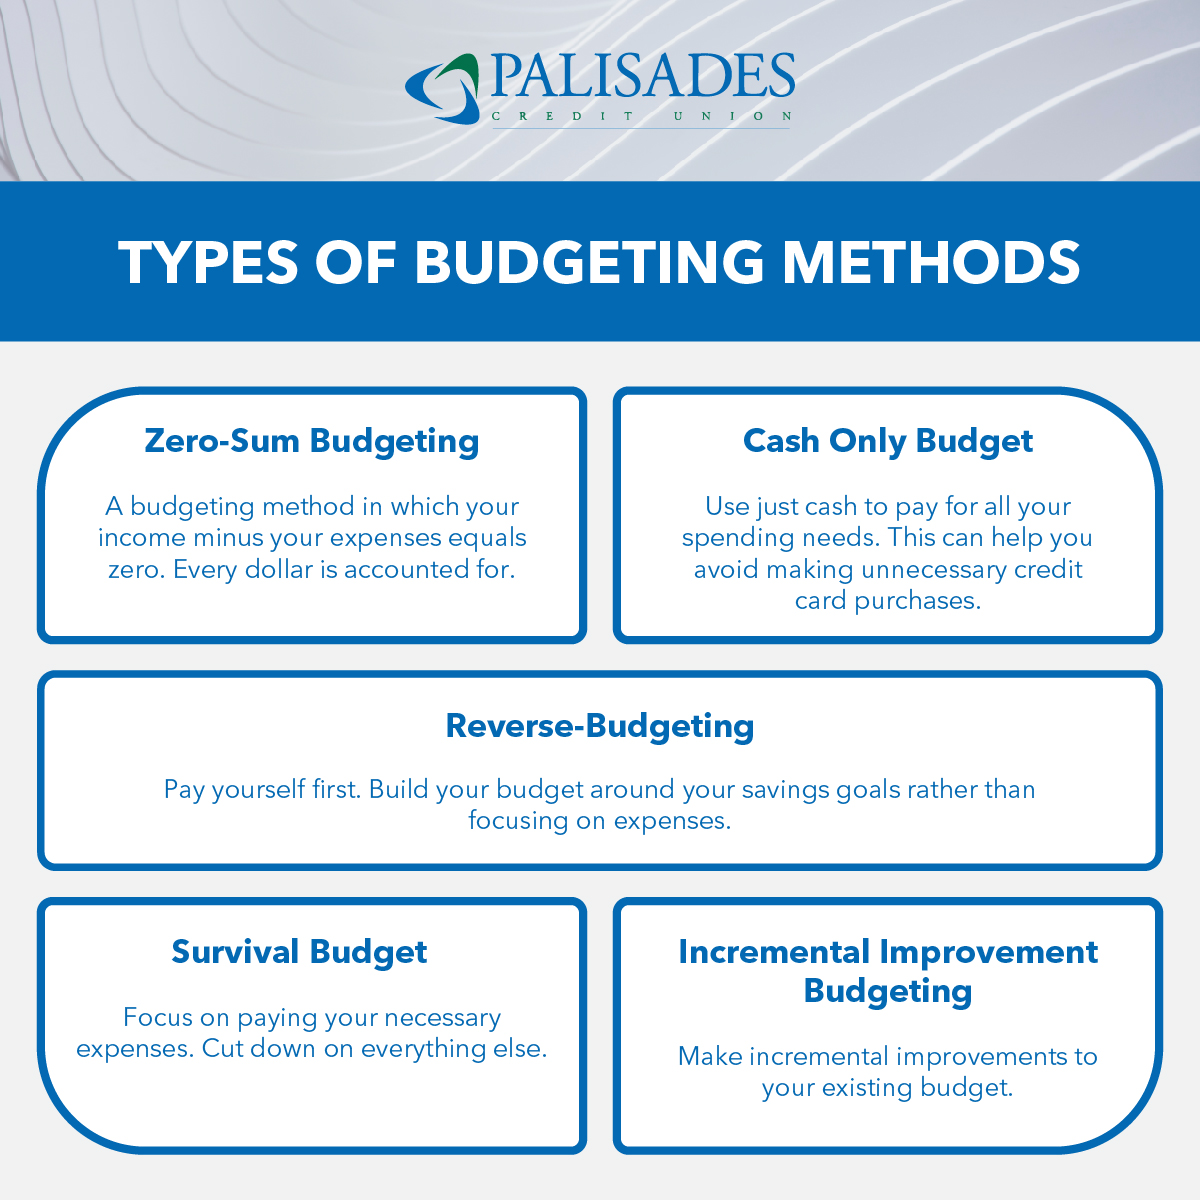 Types of Budgeting Methods  Zero-Sum Budgeting  A budgeting method in which your income minus your expenses equals zero. Every dollar is accounted for    Cash Only Budget  Use just cash to pay for all your spending needs. This can help you avoid making unnecessary credit card purchases.    Reverse-Budgeting  Pay yourself first. Build your budget around your savings goals rather than focusing on expenses.    Survival Budget  Focus on paying your necessary expenses. Cut down on everything else.    Incremental Improvement Budgeting  Make incremental improvements to your existing budget.